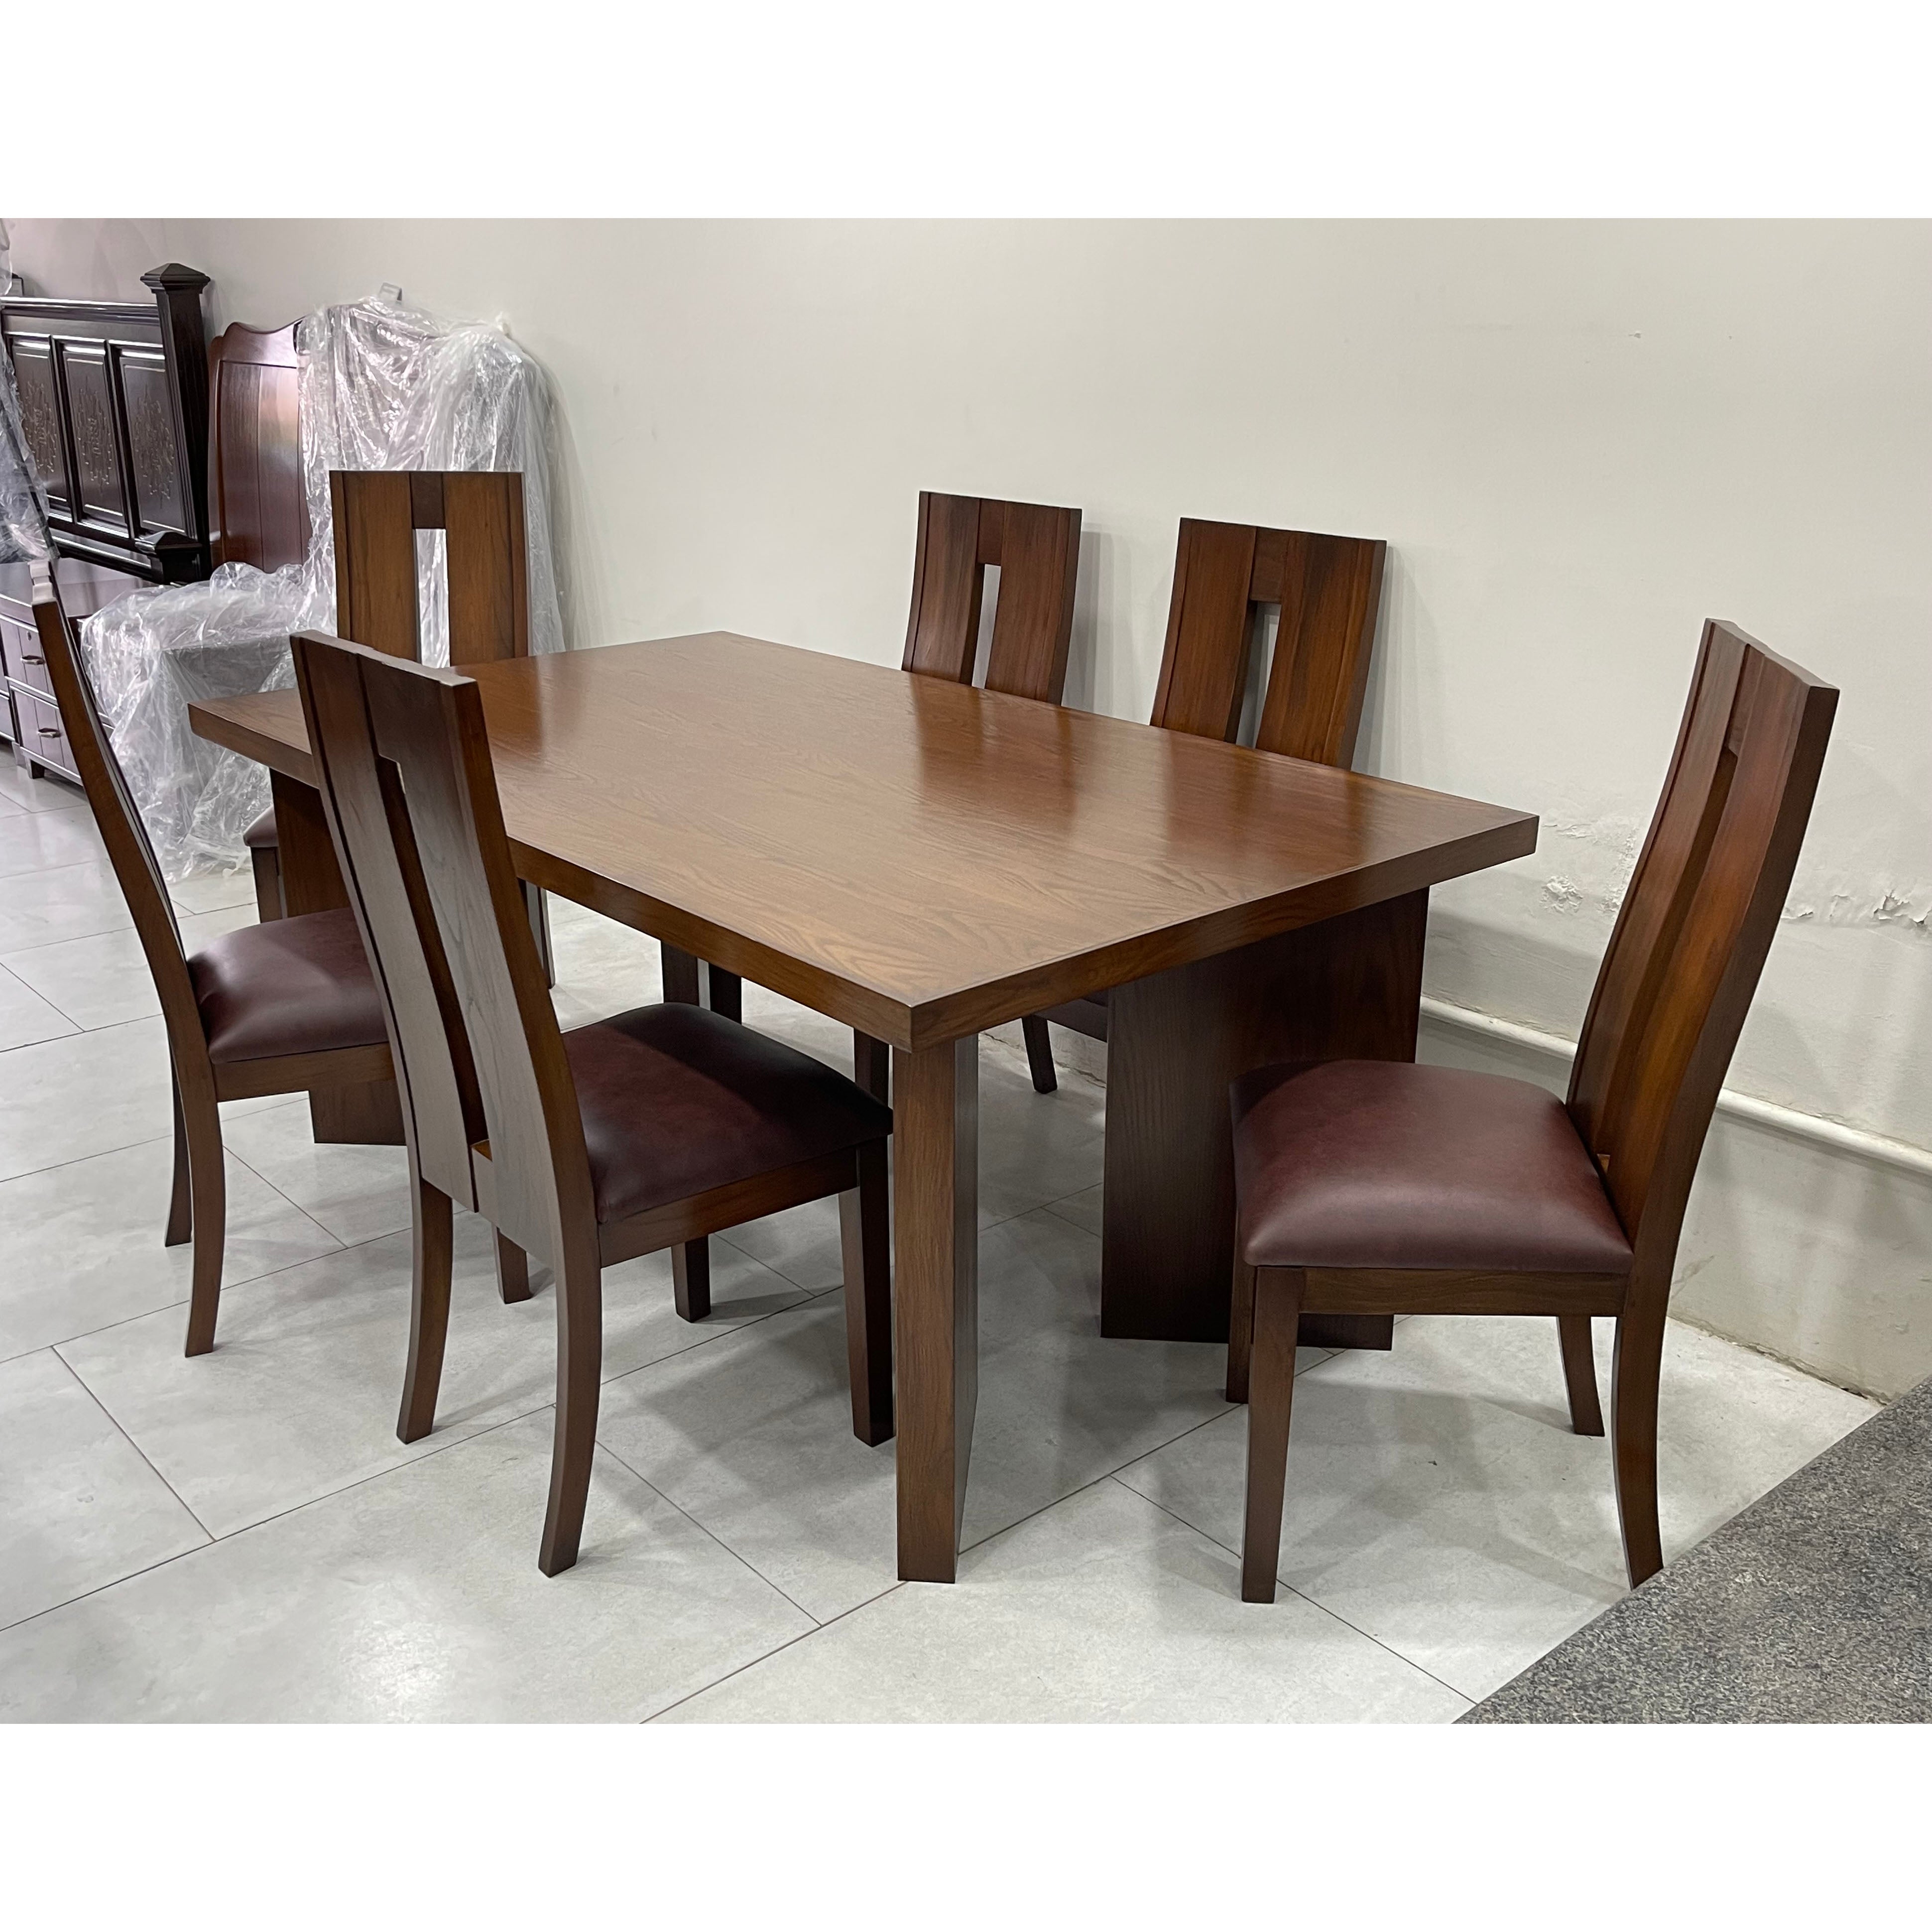 Staley Dining Set